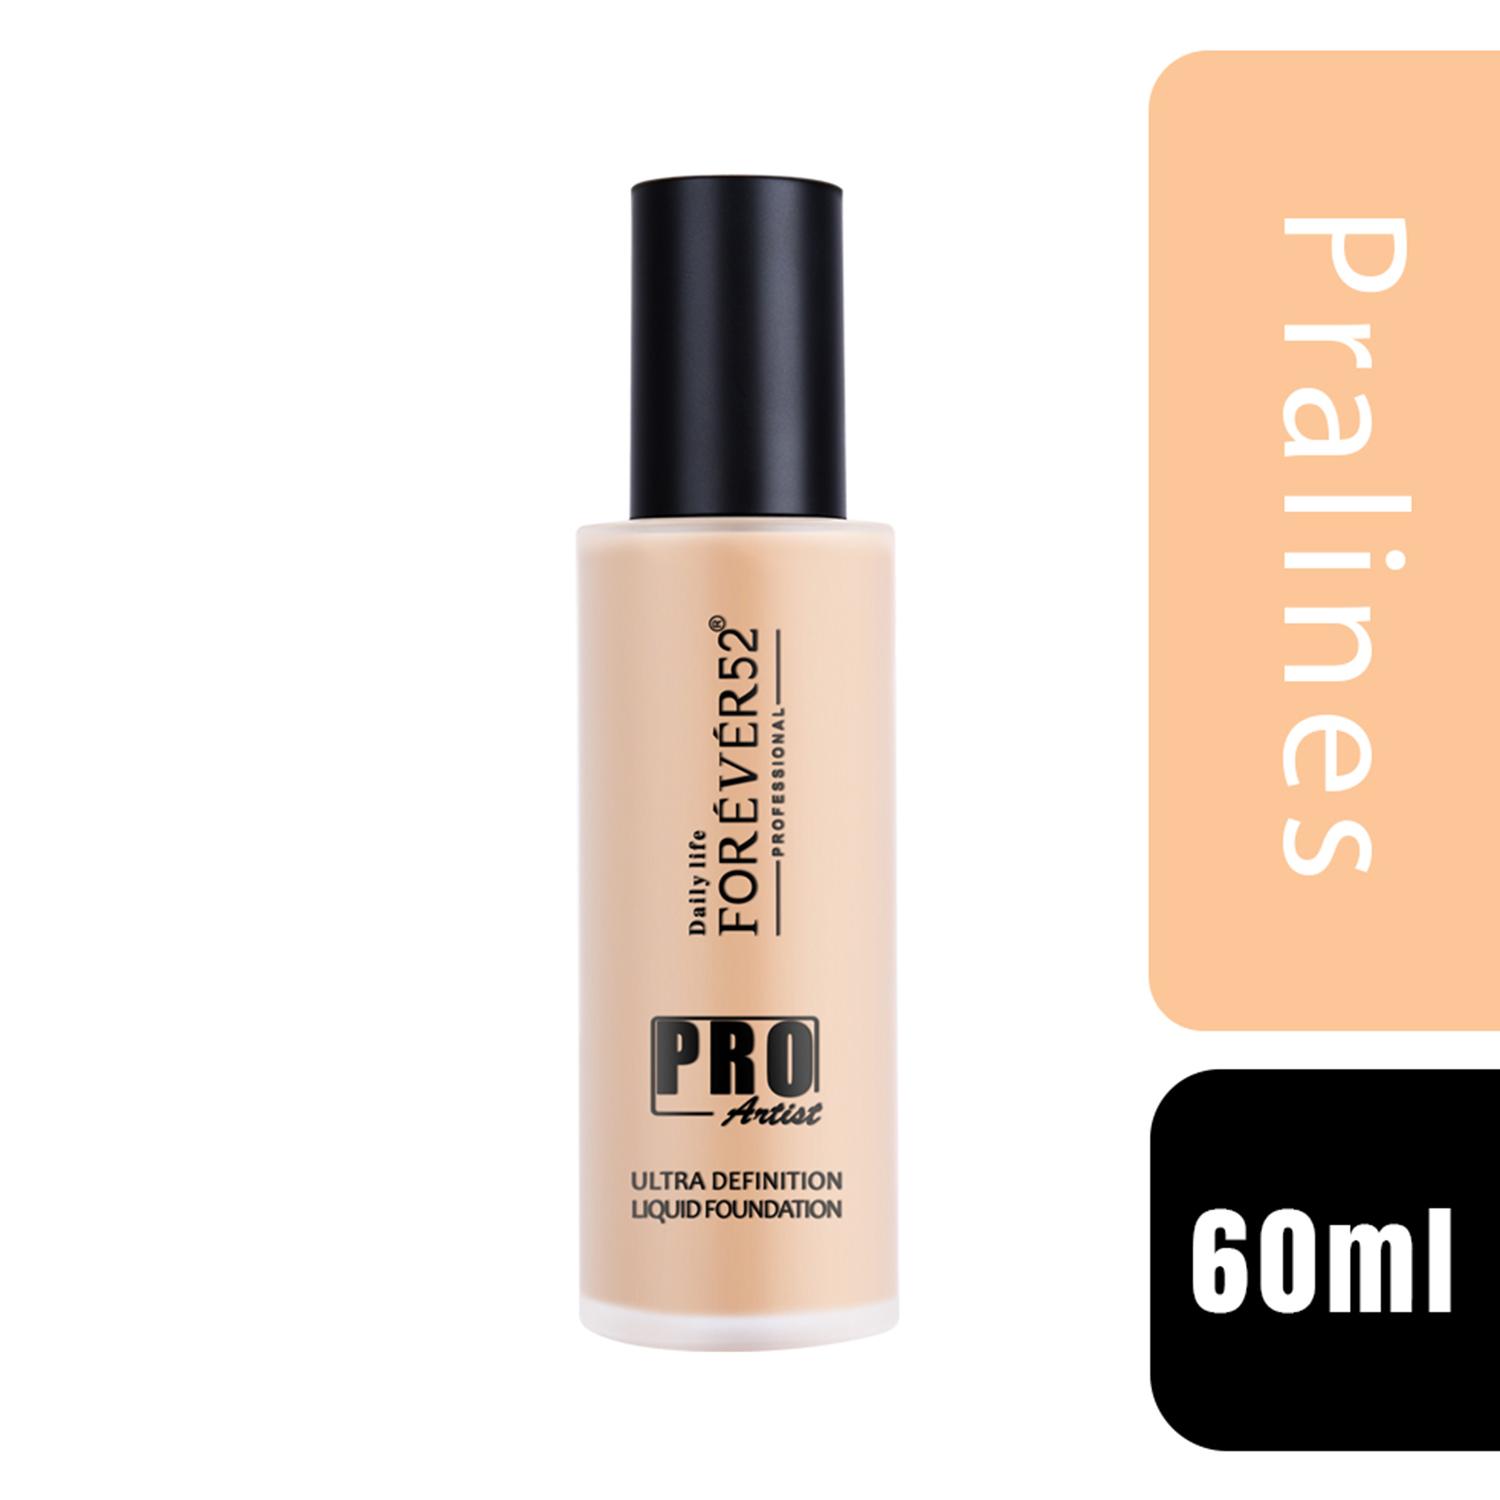 Daily Life Forever52 | Daily Life Forever52 Pro Artist Ultra Definition Liquid Foundation - Pralines (60ml)